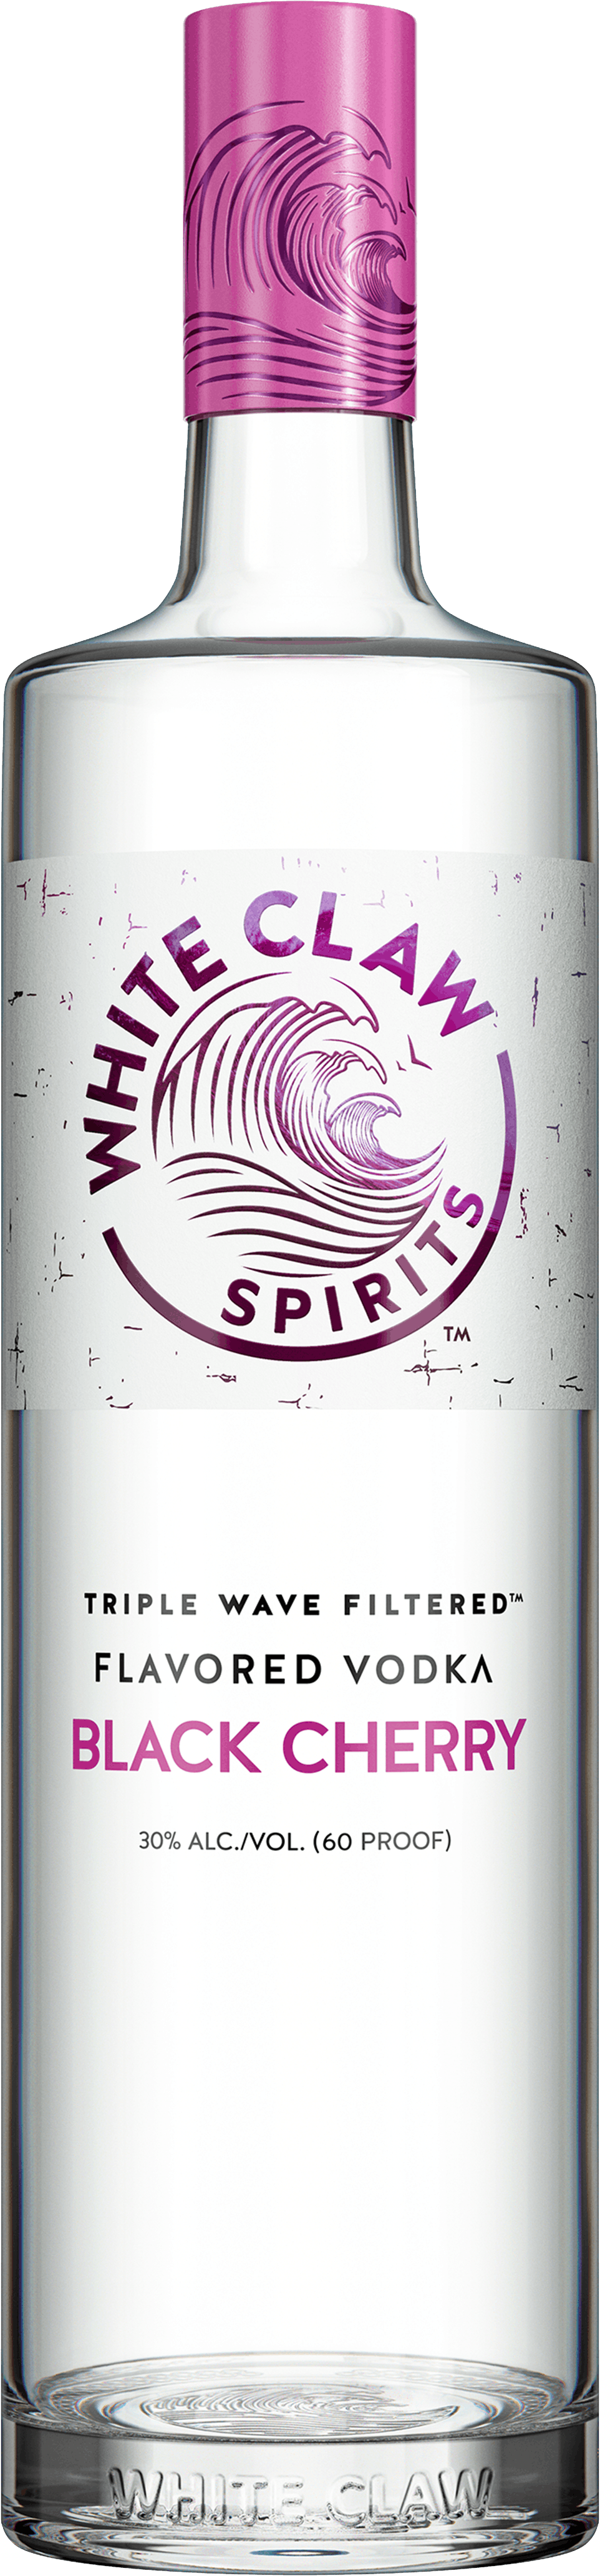 White Claw™ Flavored Vodka Black Cherry. The bottle is over an image of a crashing wave.